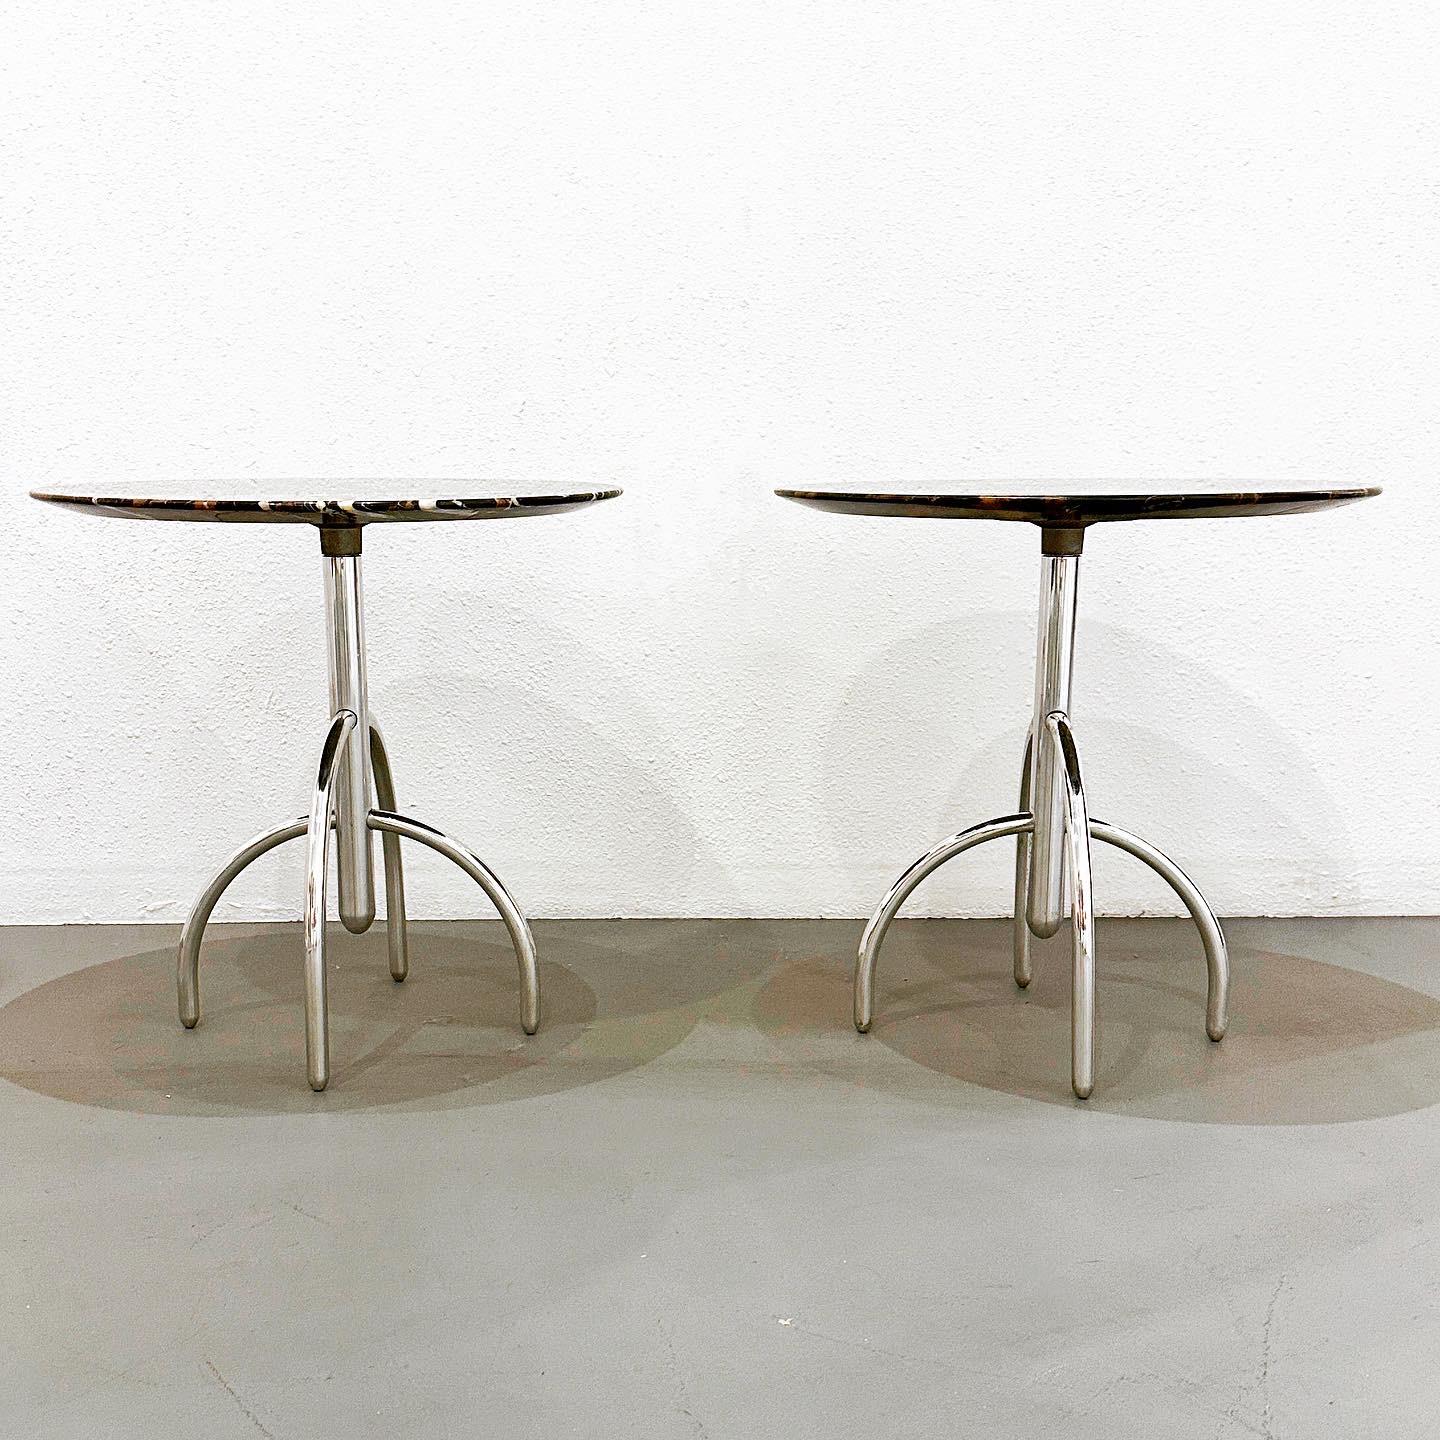 Modern Lawrence Laske for Knoll Pair Saguaro Cactus Marble Top Side Tables, ca 1993